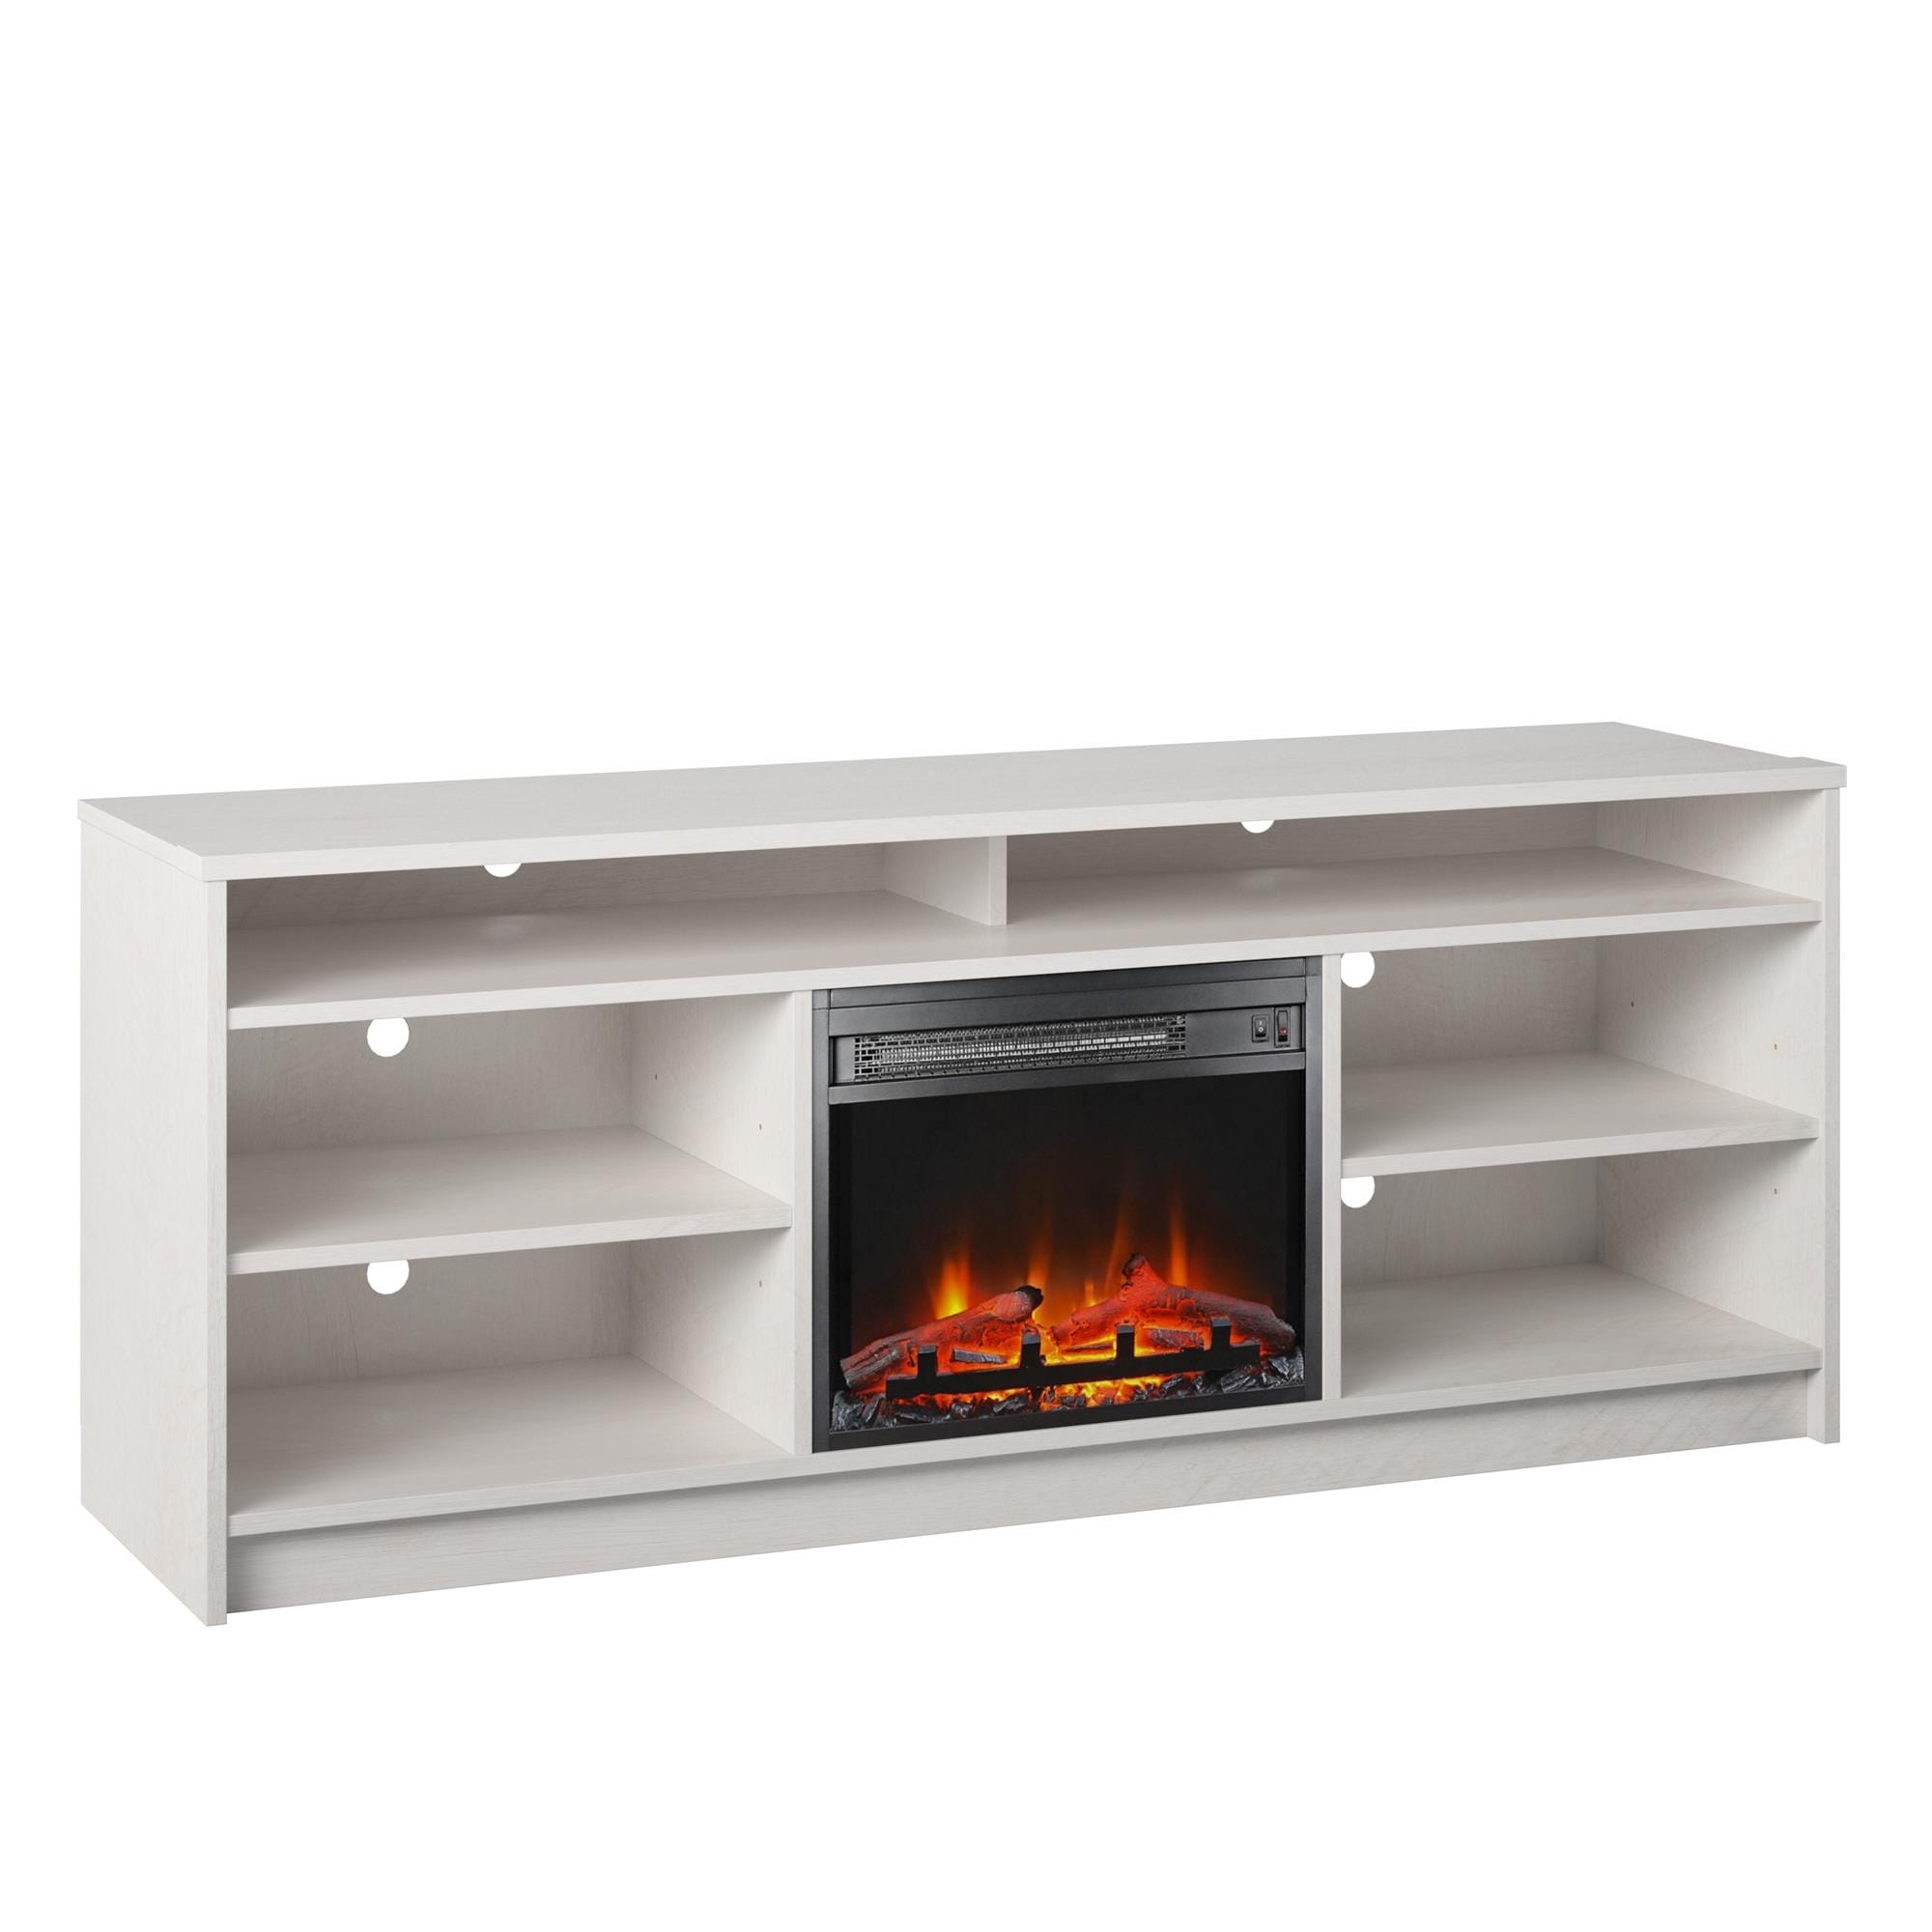 Ameriwood Home Hickory Hill 65 inch TV Stand with Electric Fireplace Insert and 6 Shelves